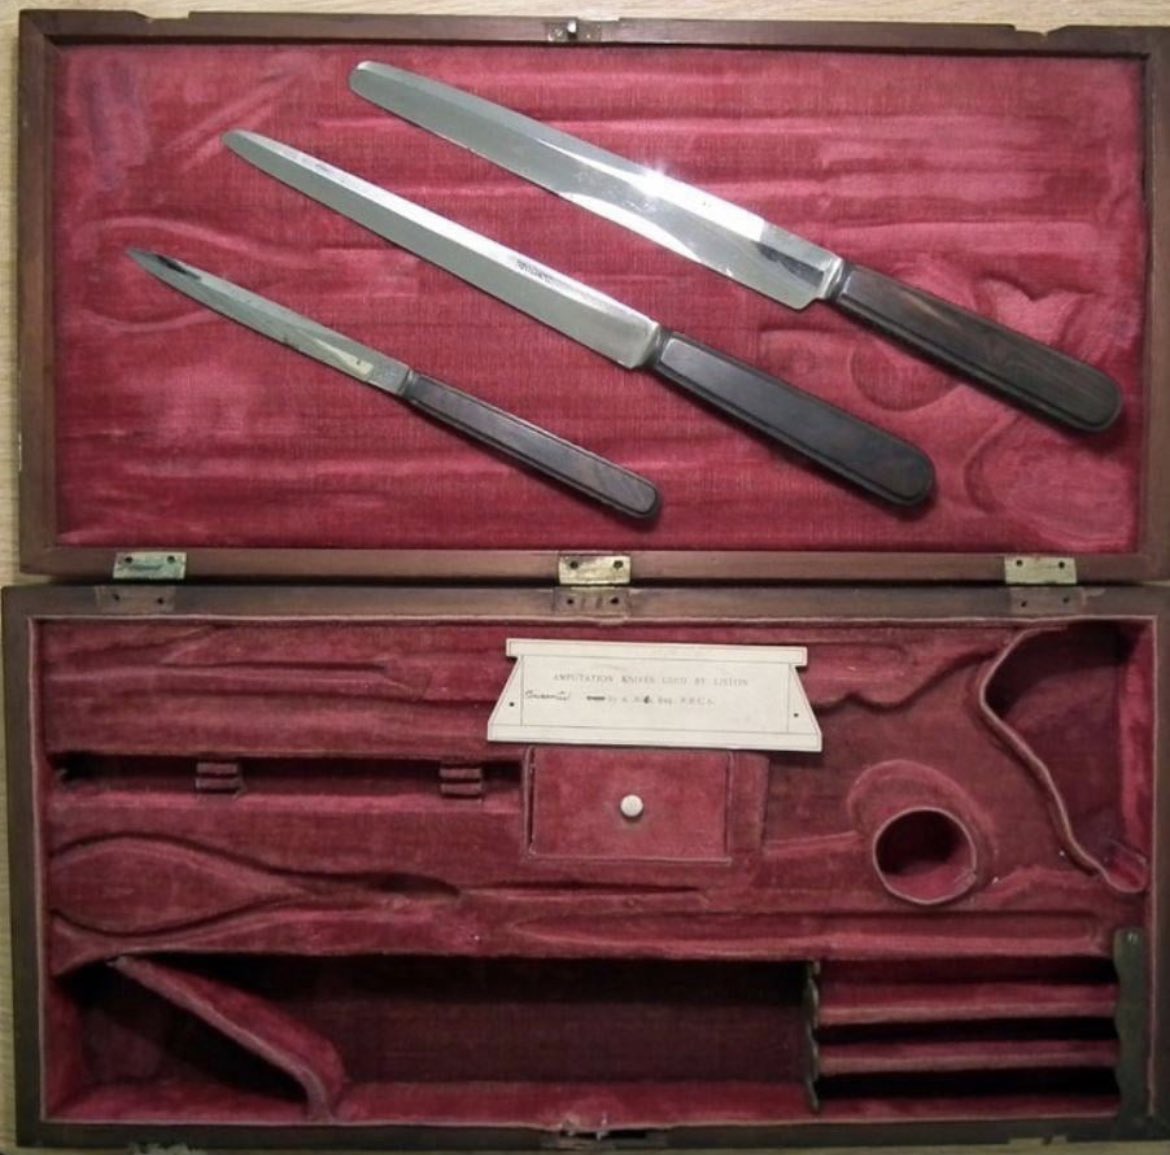 The amputation instruments used by the the infamous surgeon Robert Liston between 1815 and 1825. 

In the 1800s, Scottish surgeon Robert Liston became infamous for a surgery that led to an astonishing 300% mortality rate. 

He amputated a patient's leg in under 2.5 minutes,…